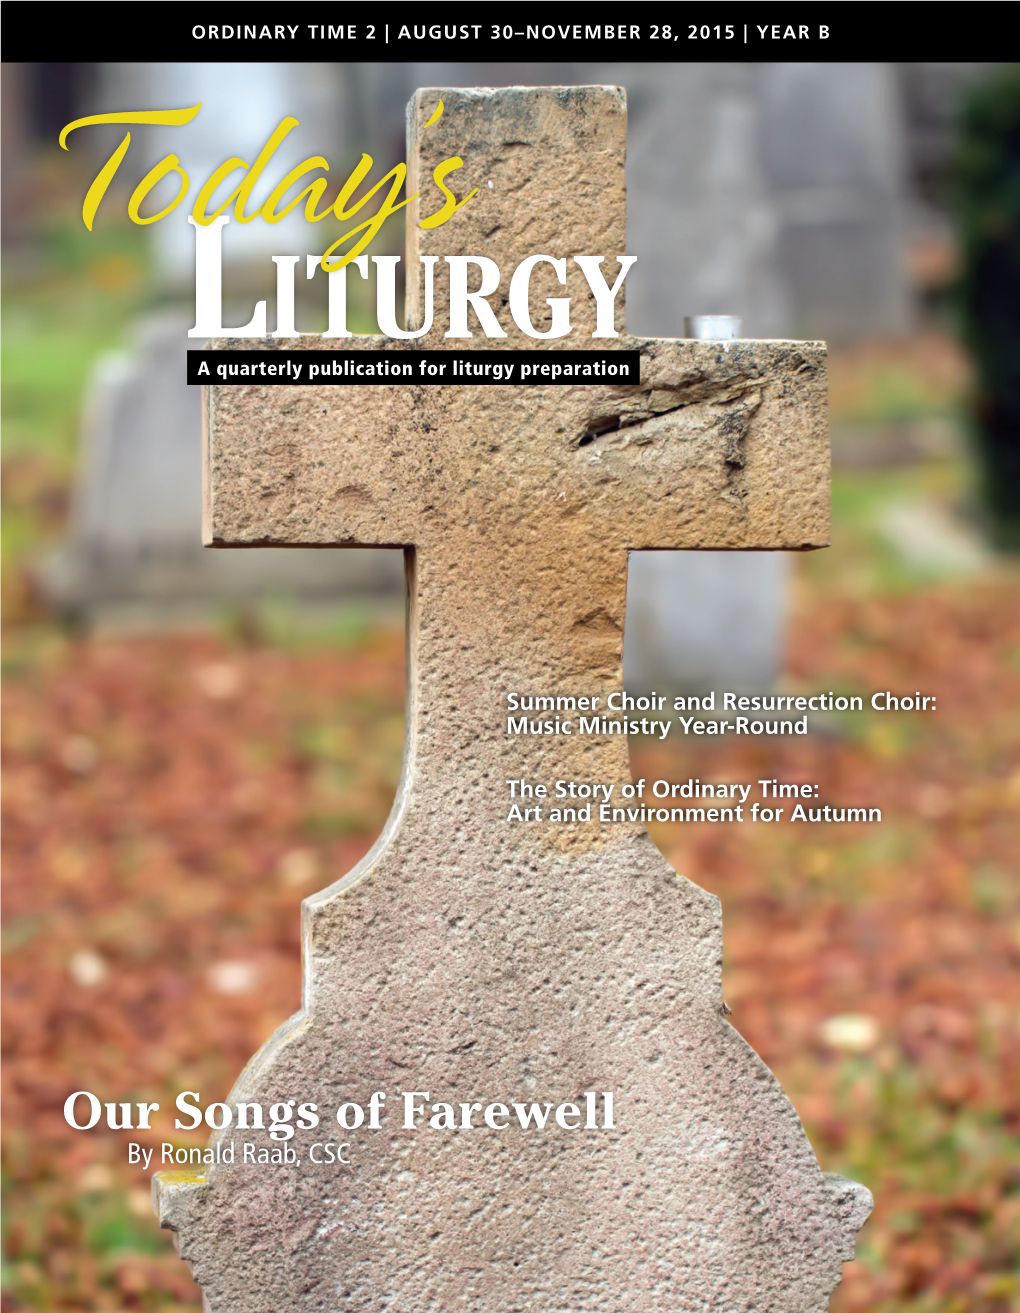 Our Songs of Farewell by Ronald Raab, CSC ORDINARY TIME 2 | AUGUST 30–NOVEMBER 28, 2015 | YEAR B